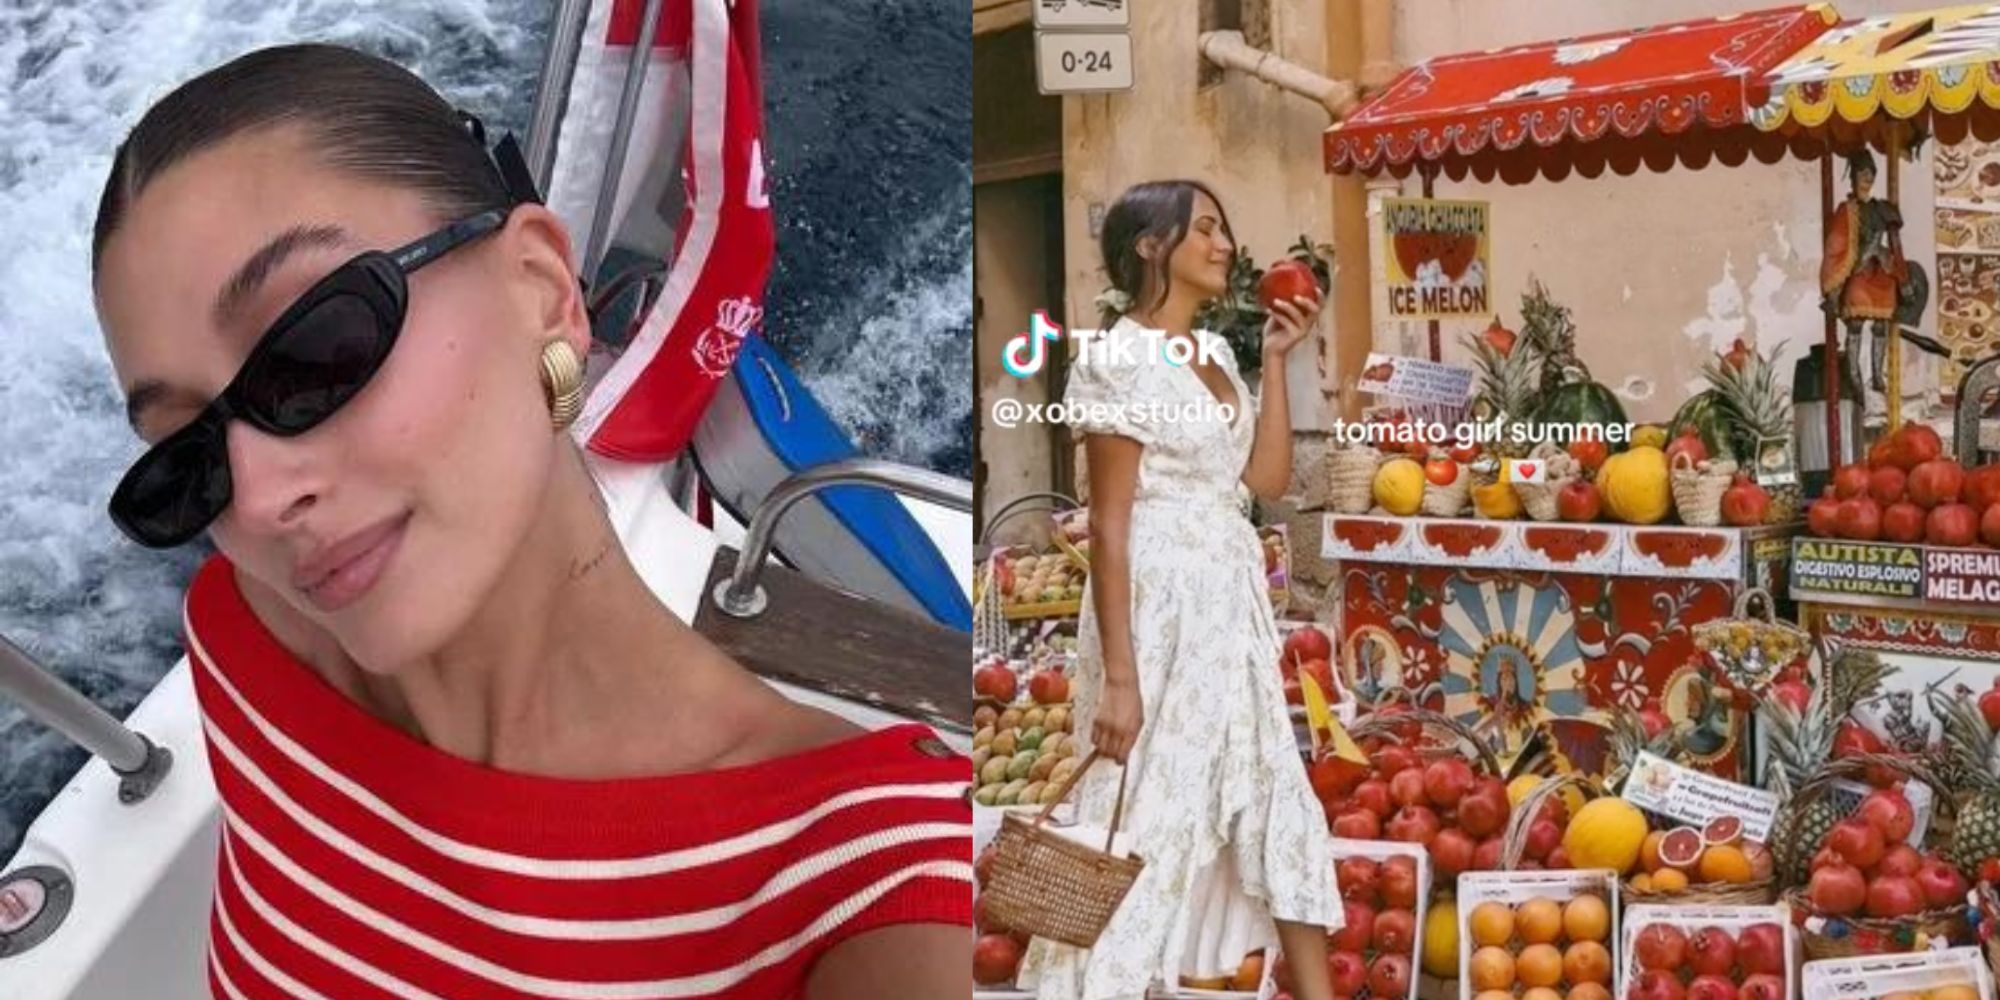 What Is Tomato Girl Summer? TikTok's Latest Trend Is Not What It